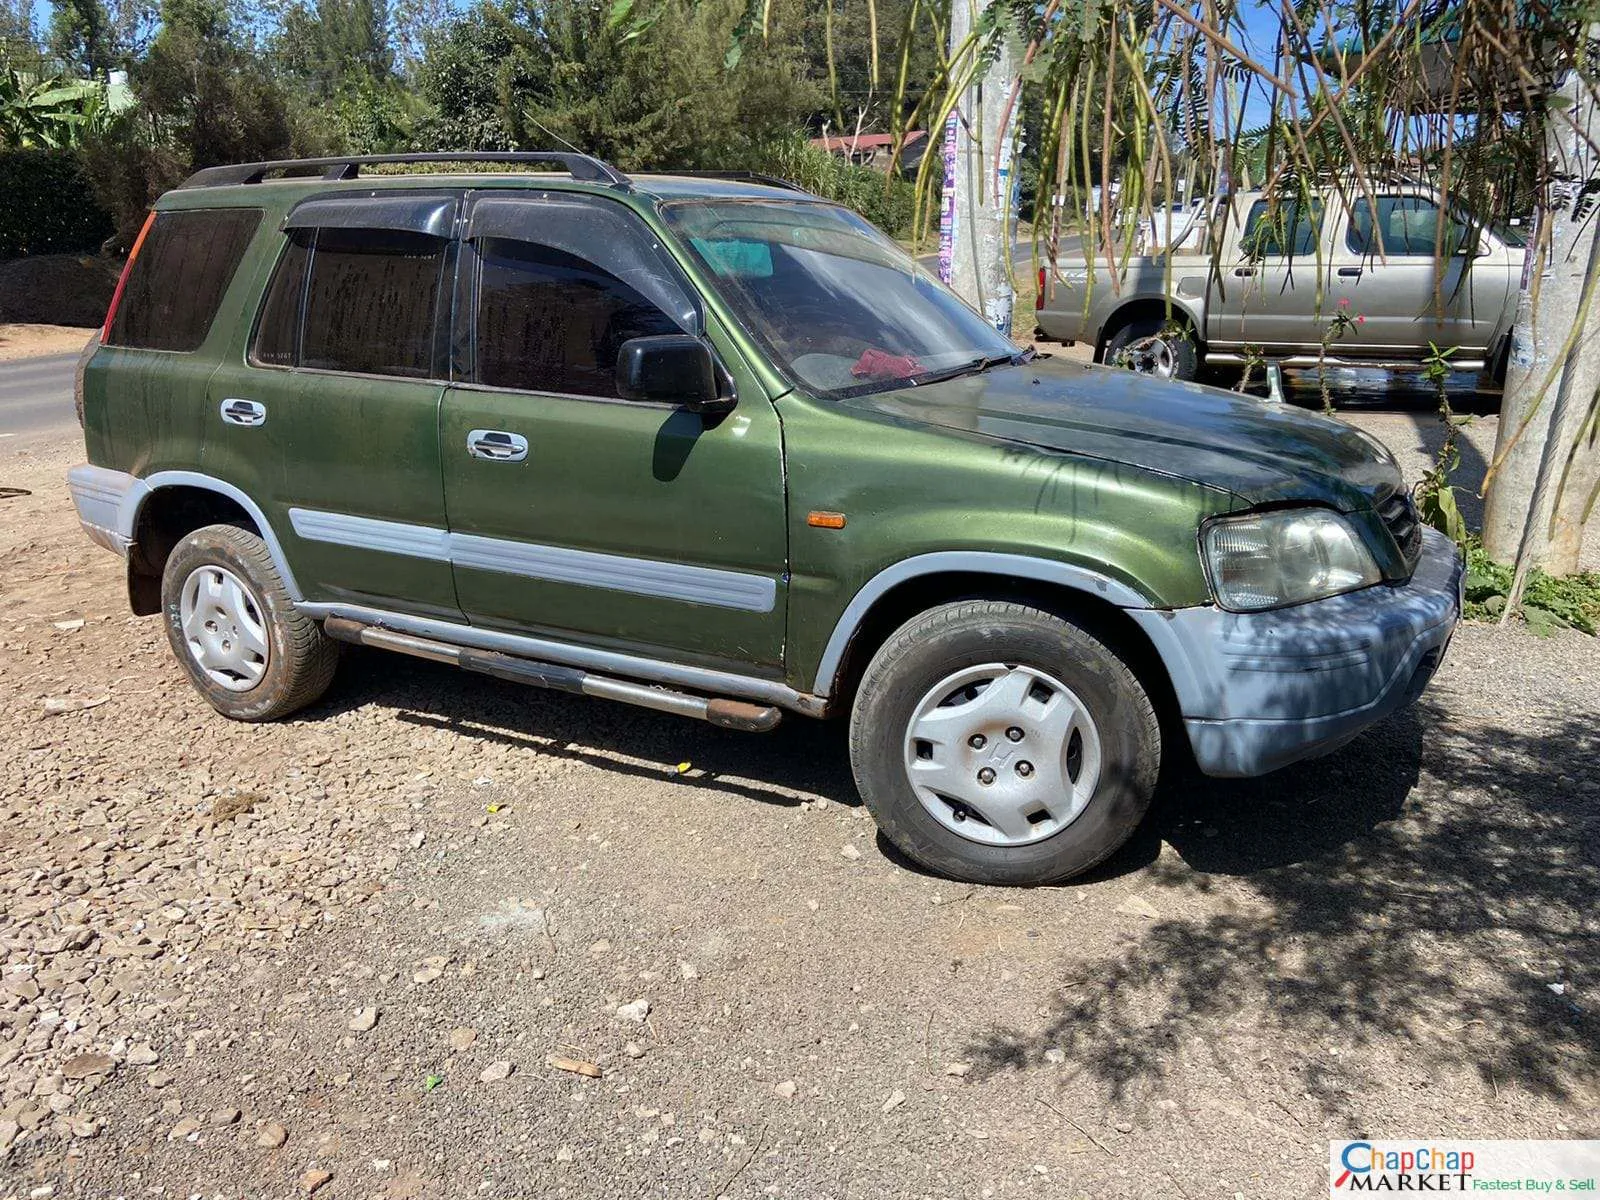 Honda CRV for Sale in Kenya 290K ONLY 🔥 You Pay 30% Deposit Trade in OK EXCLUSIVE (SOLD)